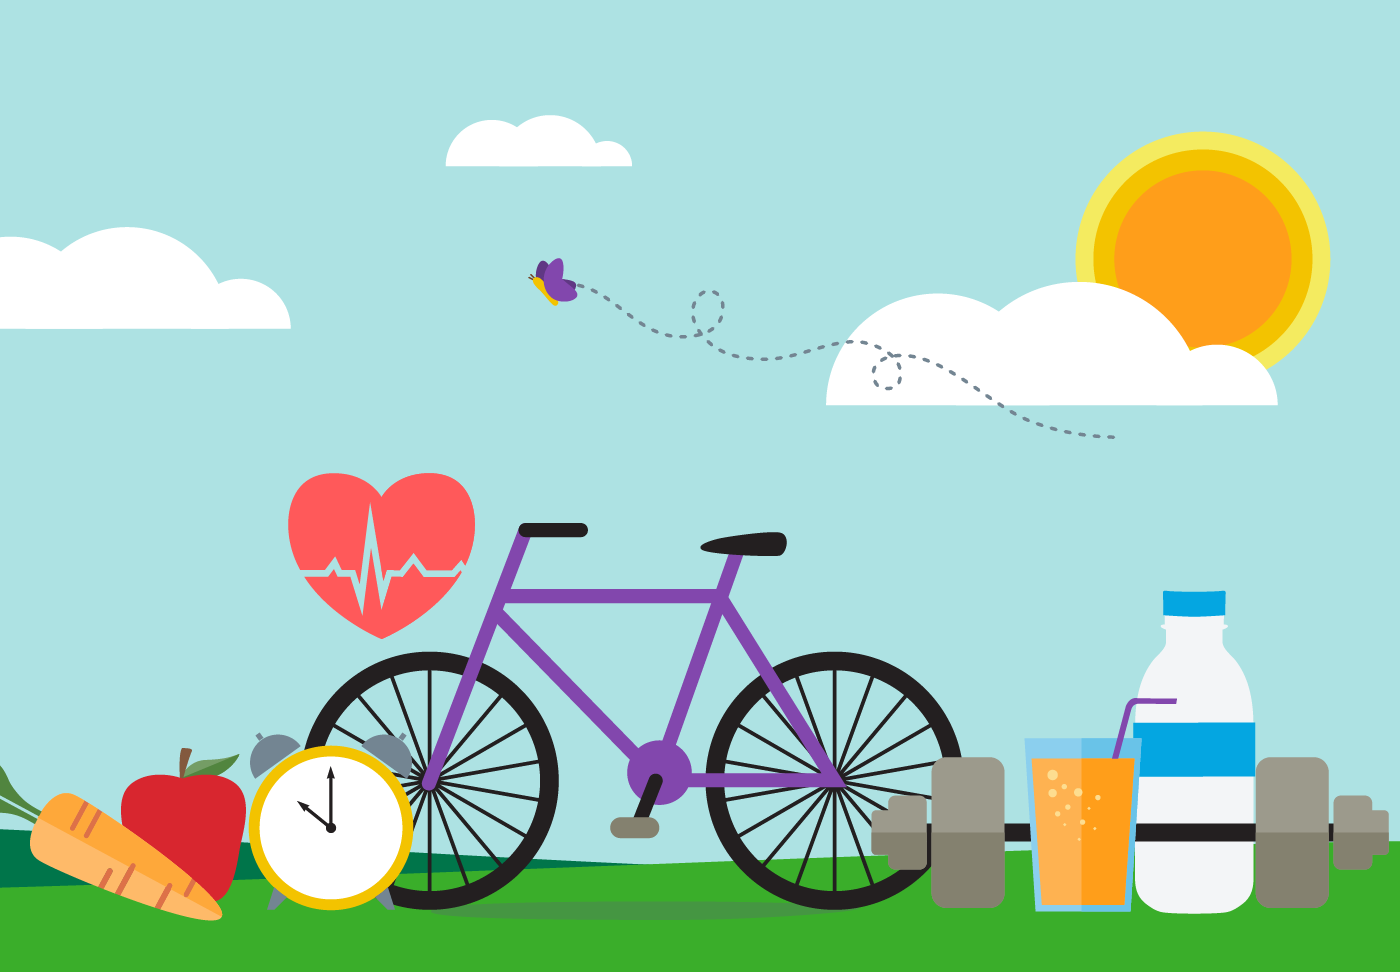 Illustration of a purple bike surrounded by healthy symbols, including an apple, carrot, clock and weight.